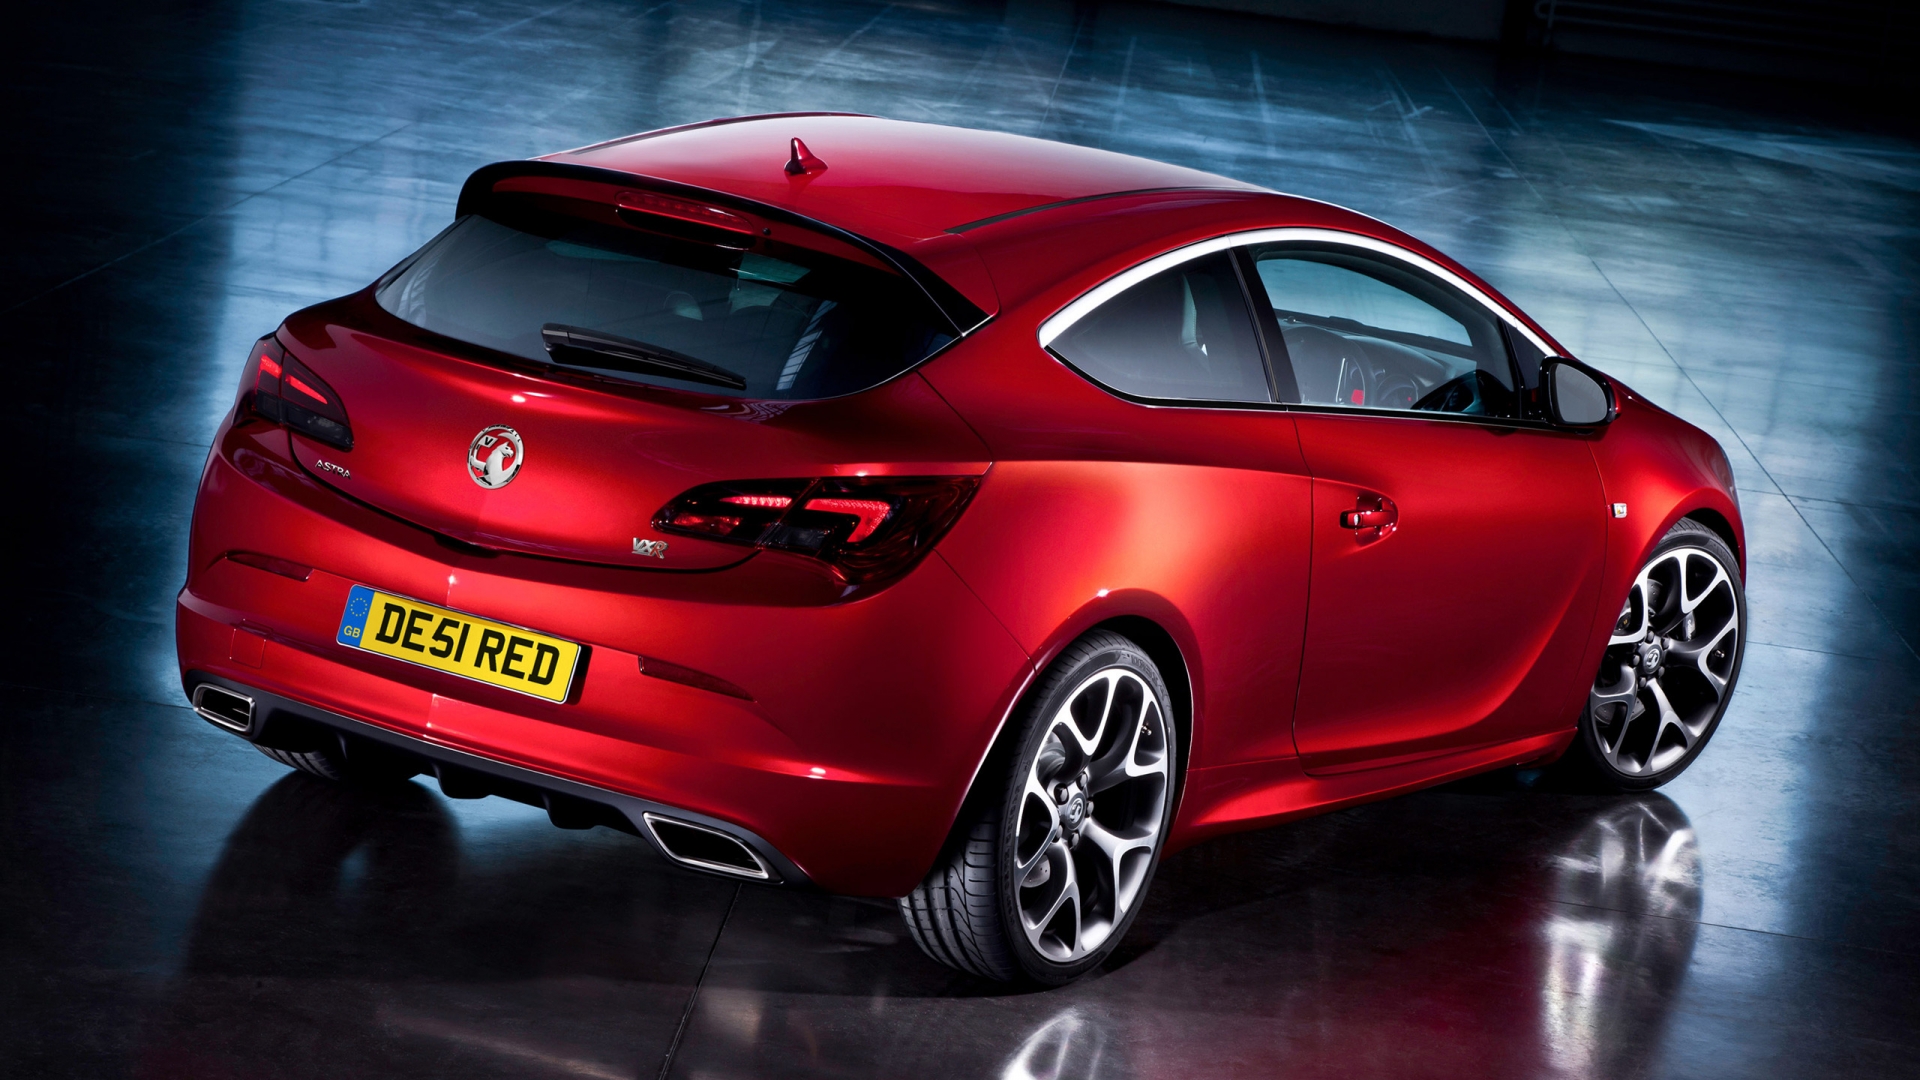 Vauxhall Astra GTC Rear for 1920 x 1080 HDTV 1080p resolution